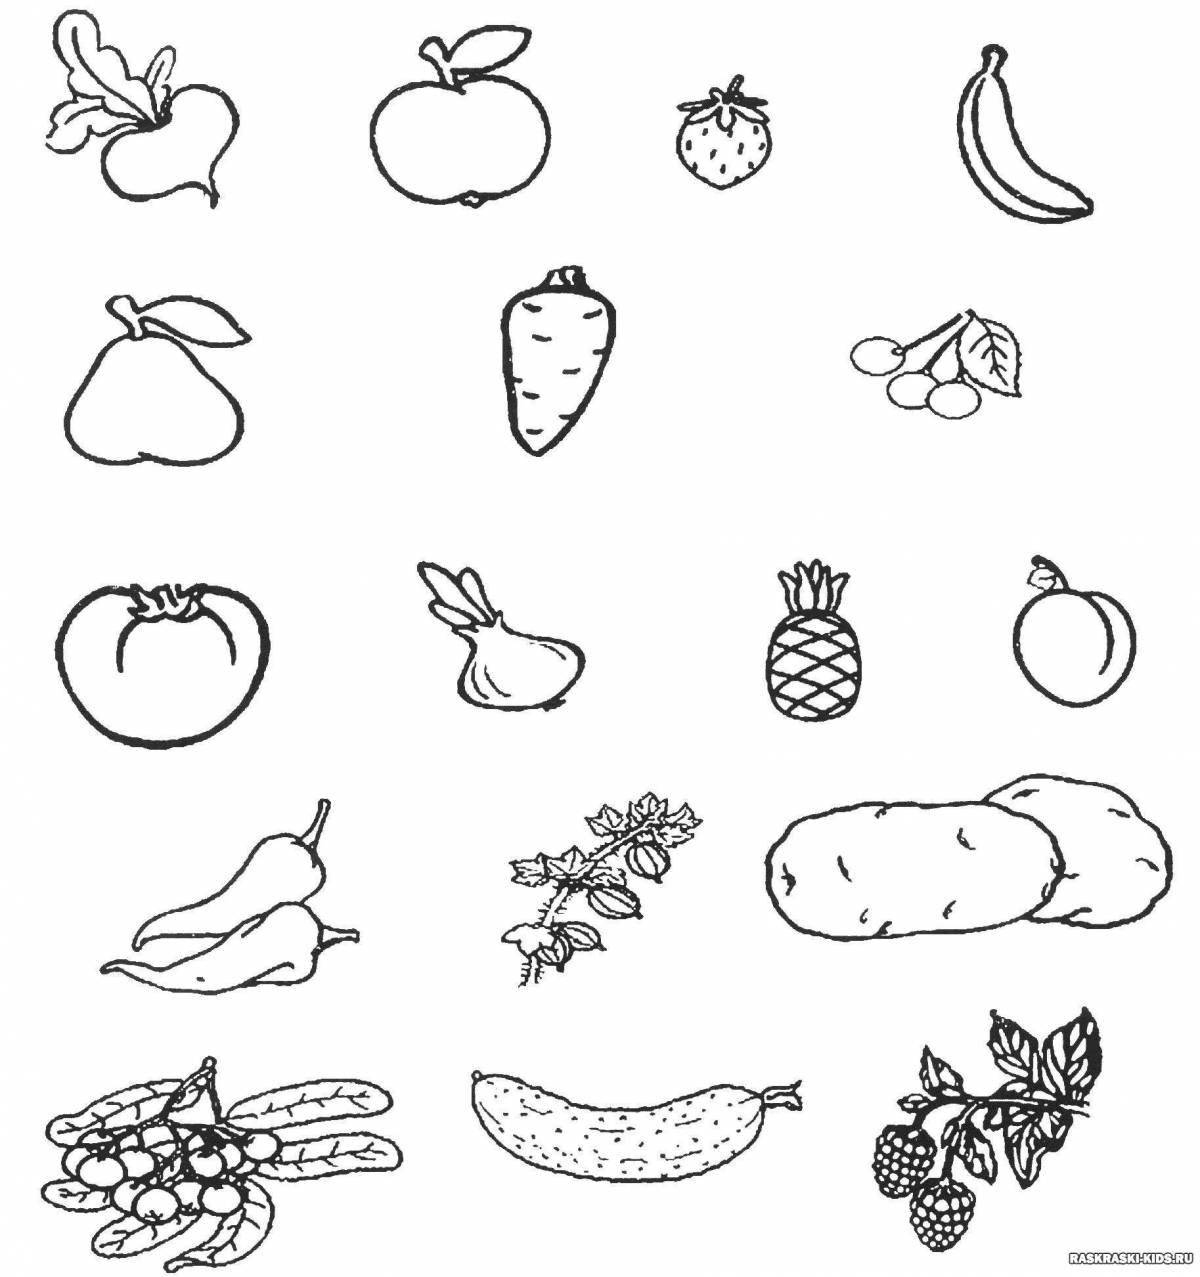 A fun vegetable coloring book for 5-6 year olds